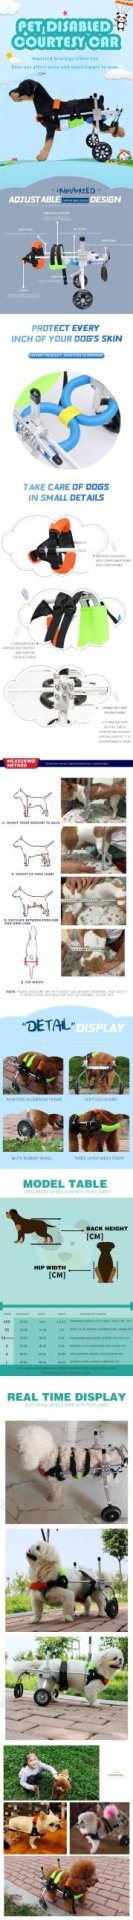 H433449c009a343a2878d249b99df3536A 4 - Hot Selling Pet Rehabilitation Therapy Supplies Strap Design Handicap Dog Wheelchair For Back Legs